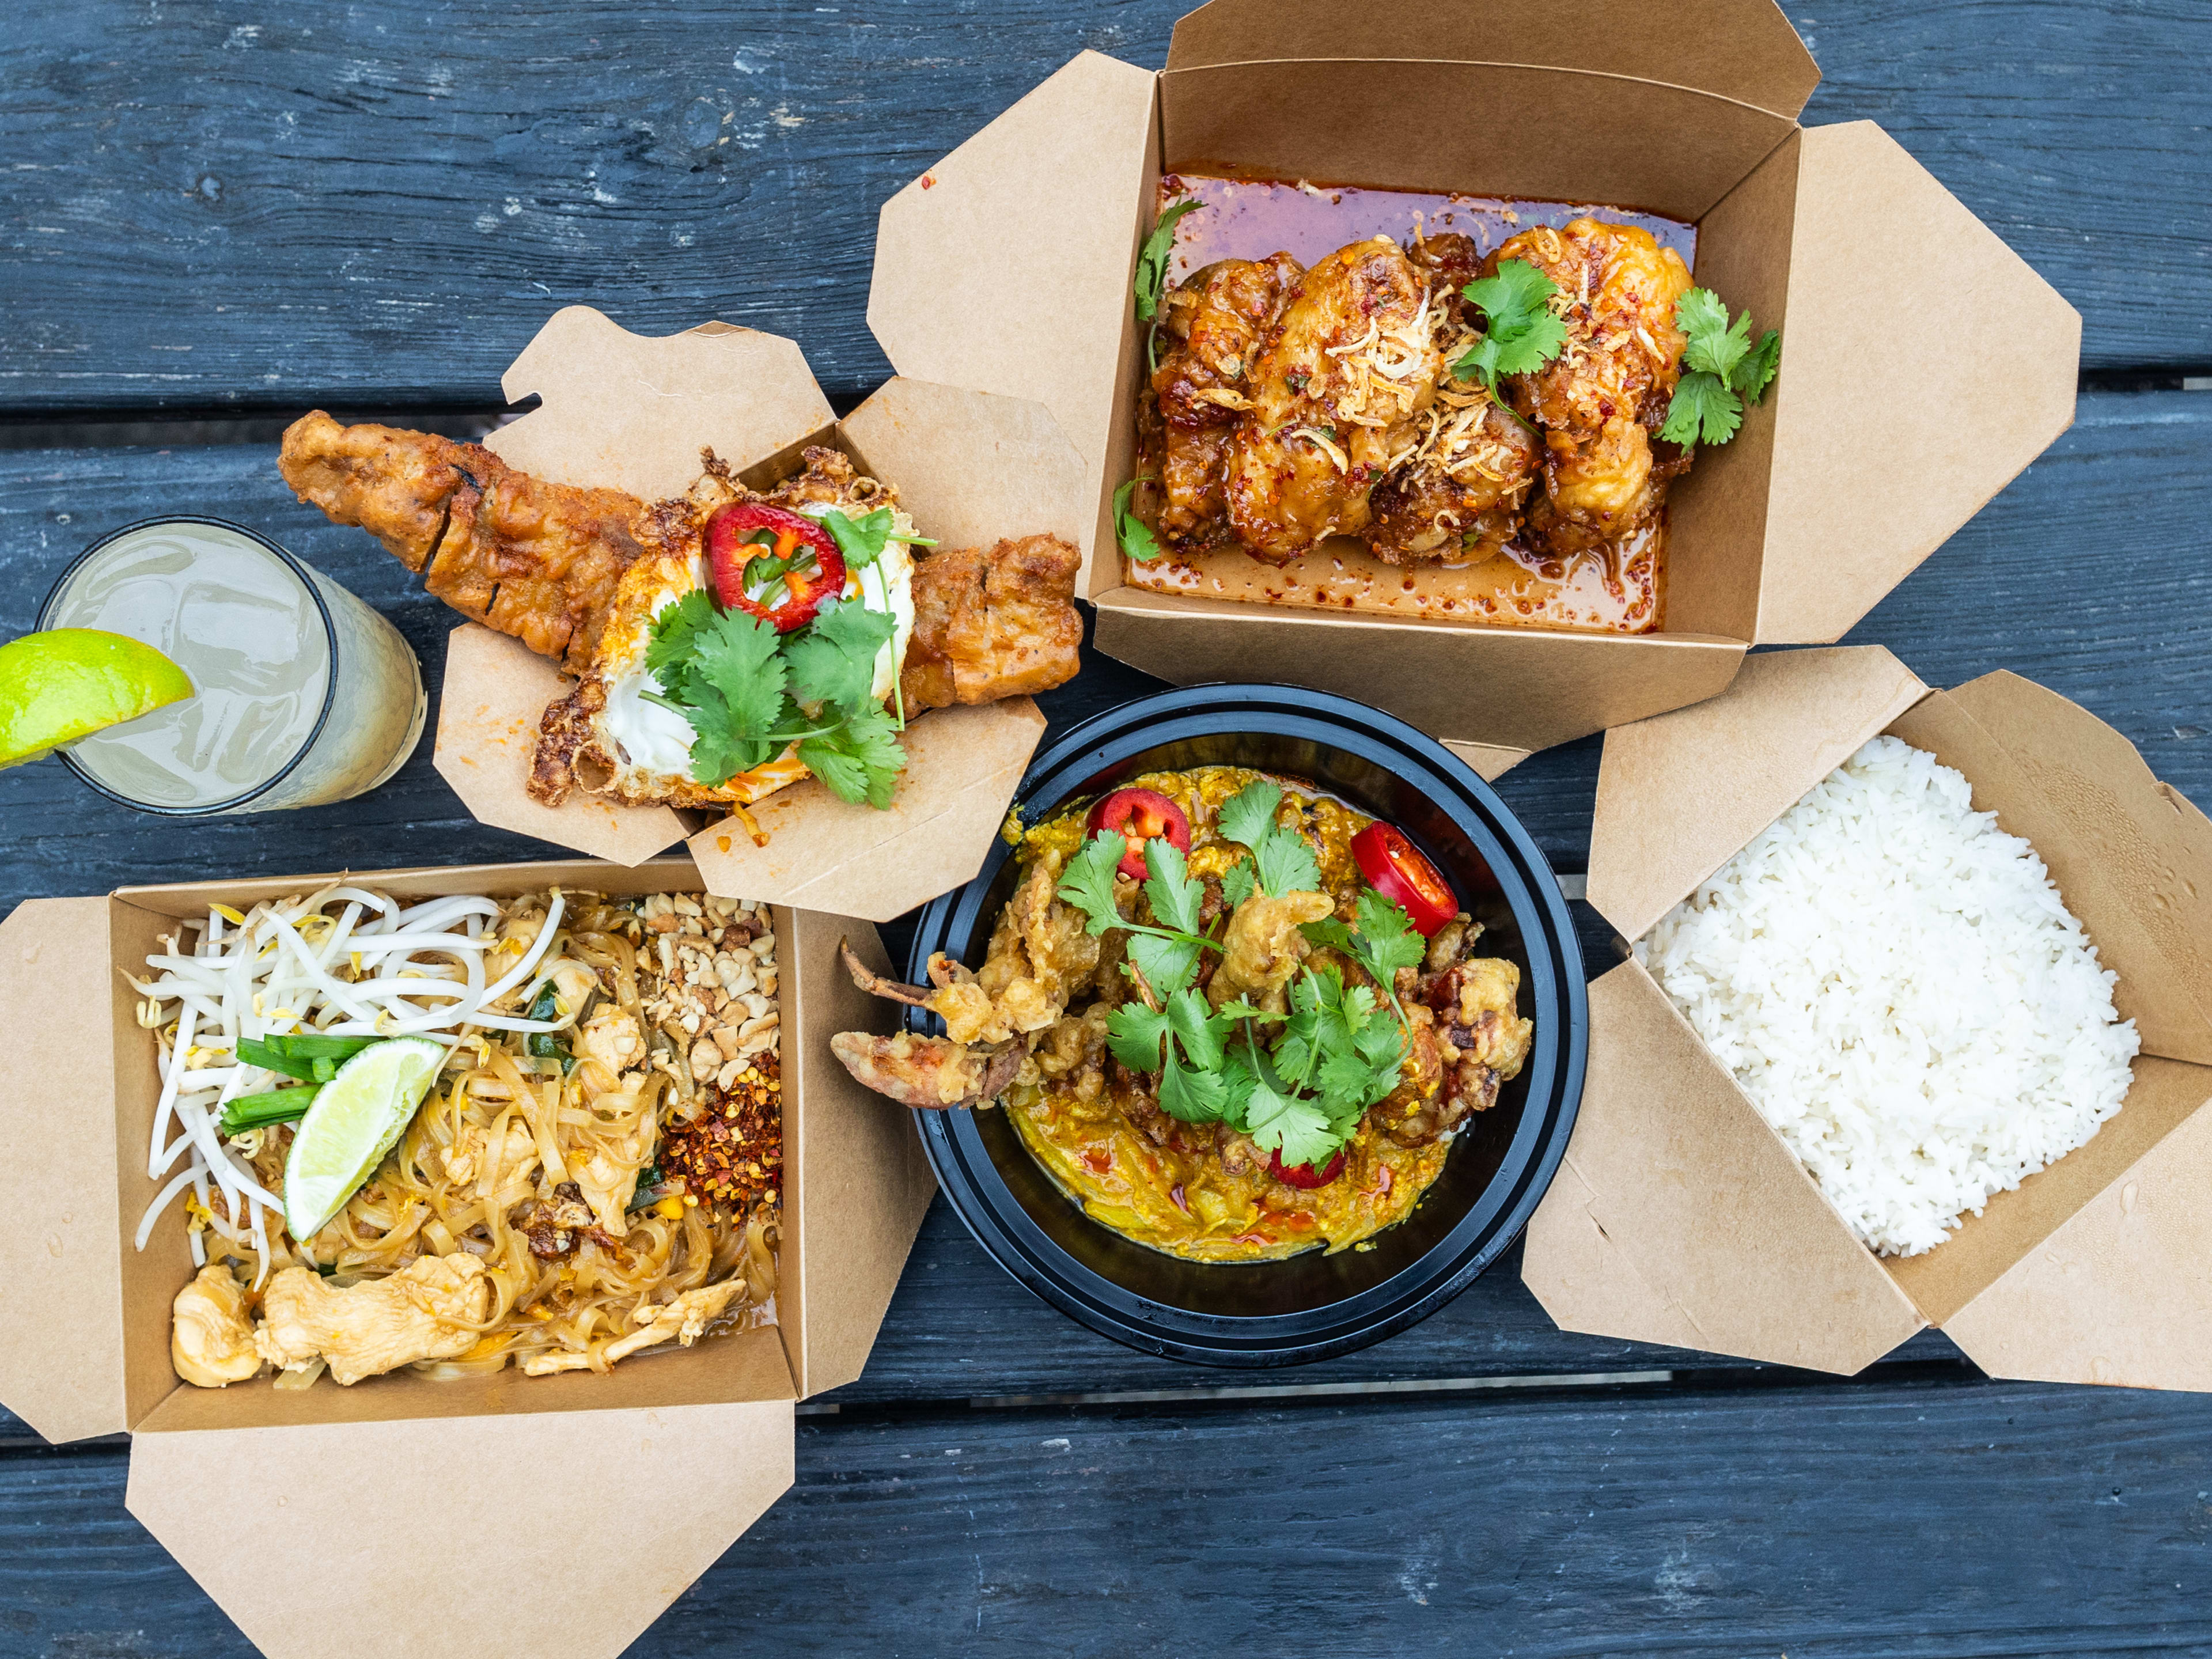 A spread of dishes in takeaway containers from Kiin Di.